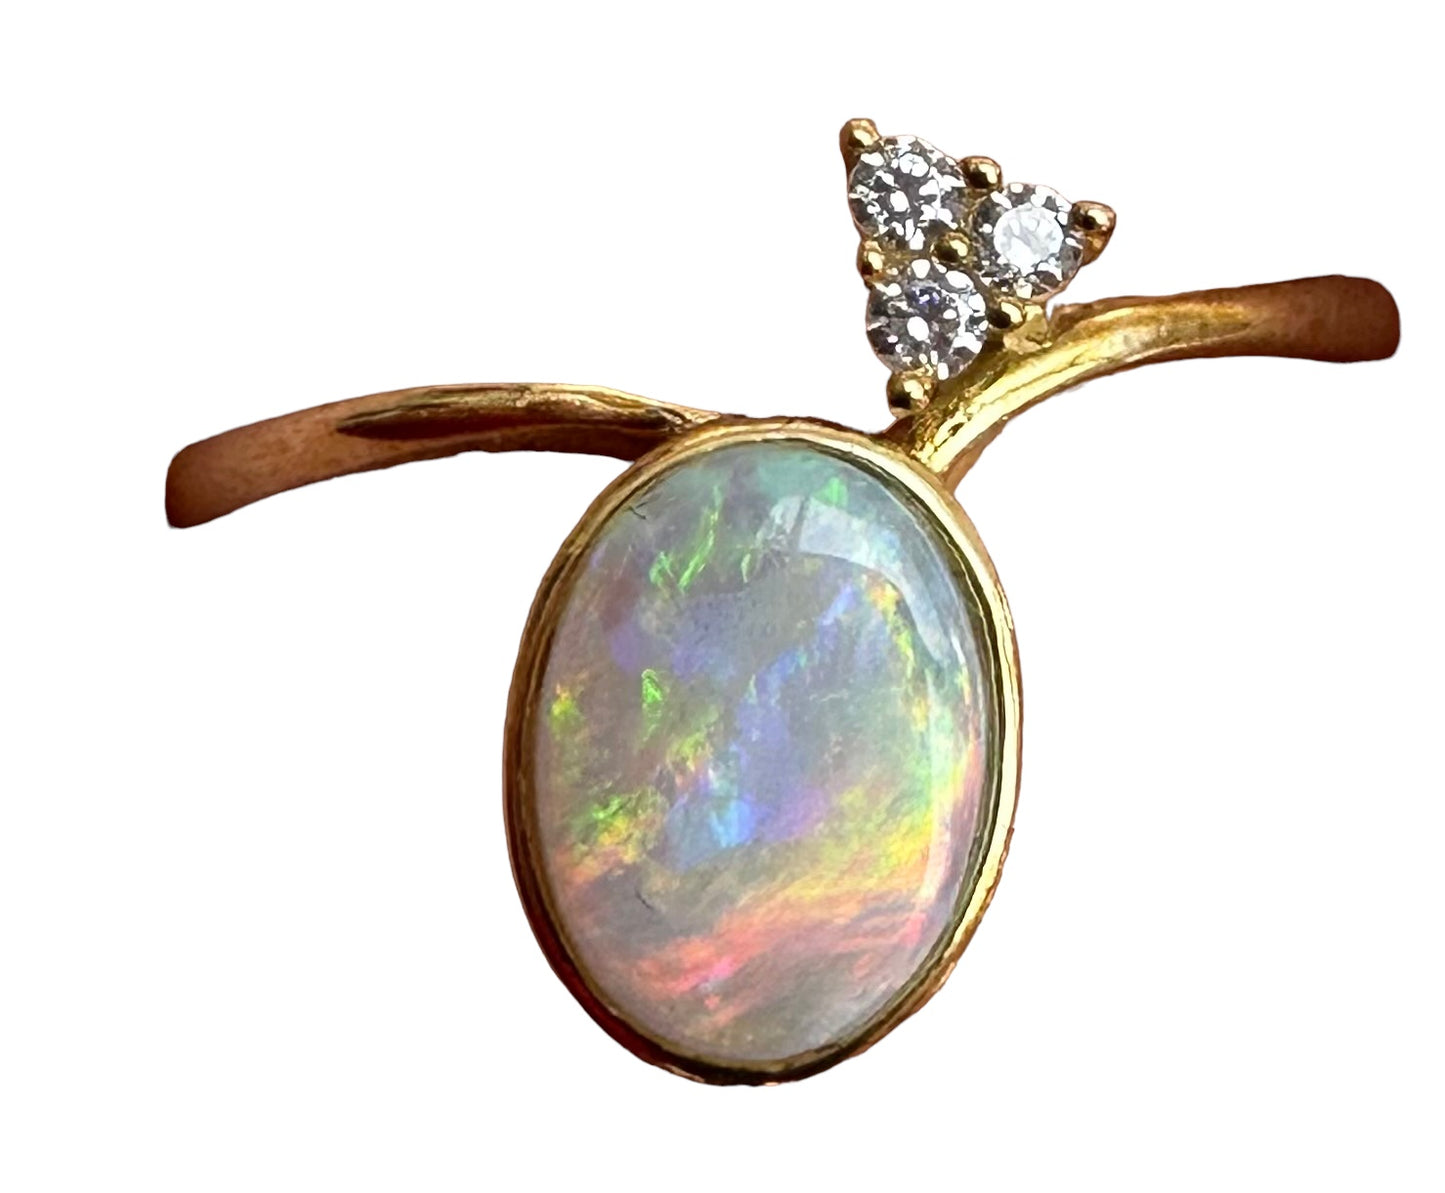  Unique Australian Opal Ring.  Oval shaped Natural Solid Crystal Opal.  All the colours of the rainbow.  Cubic Zirconia detail.  Solid 9k gold.  Size:  N 1/2   to    7 .  Opal measures : 8 x 6 mm  Cubic Zirconias measures : 1mm rounds  Weight : 8 ct  or  1.6 grams  All measurements are approximate.  (3581)